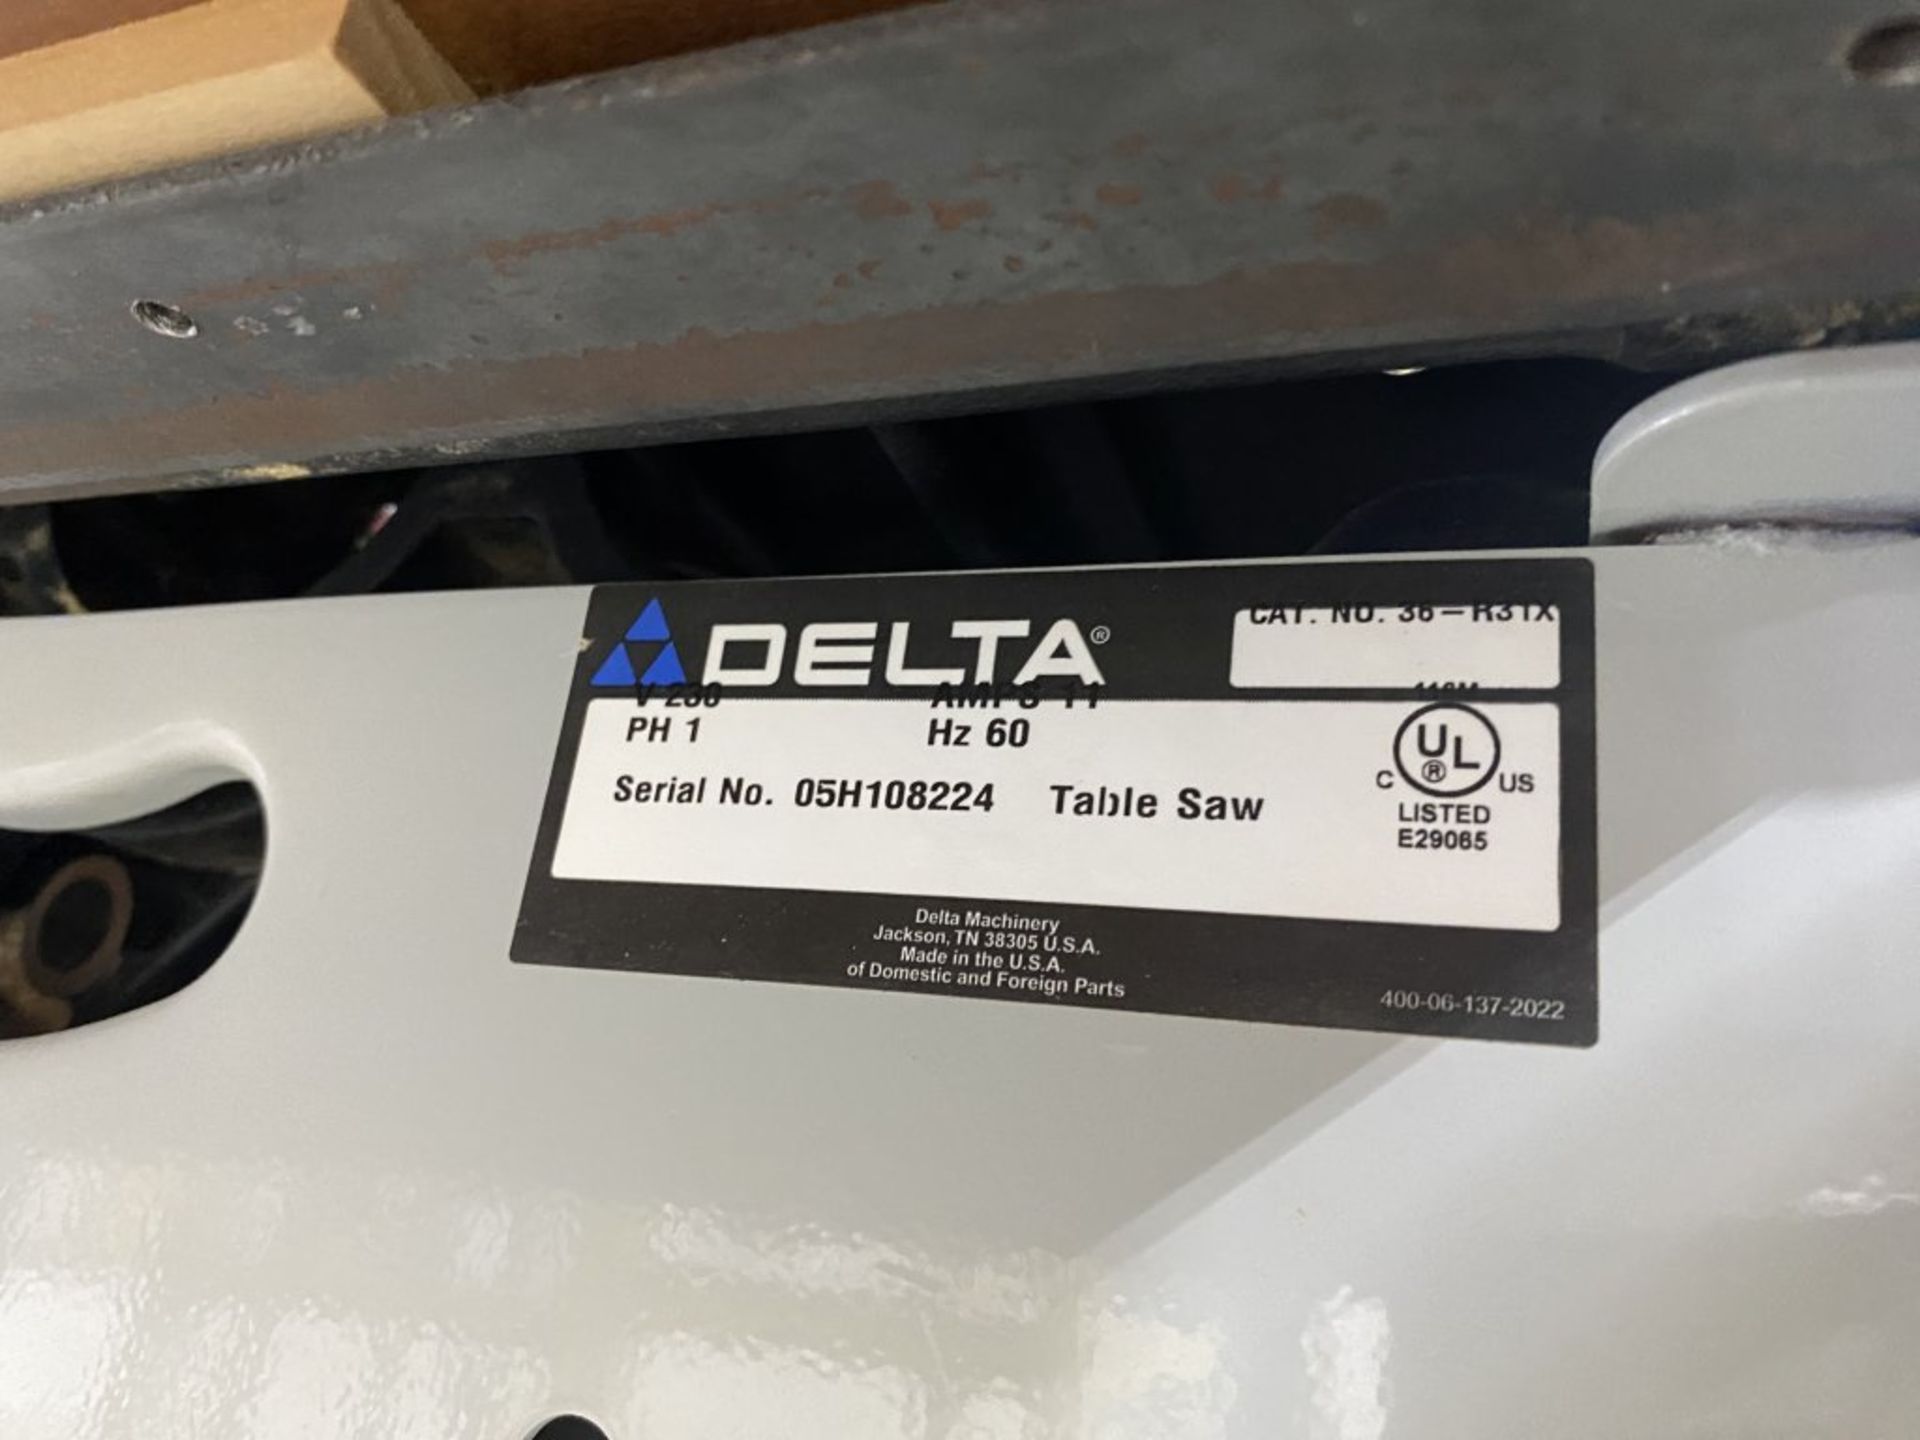 DELTA X5 UNISAW TABLE SAW, SINGLE PHASE, WITH EXTENSION, S/N: 05H108224 - Image 9 of 9